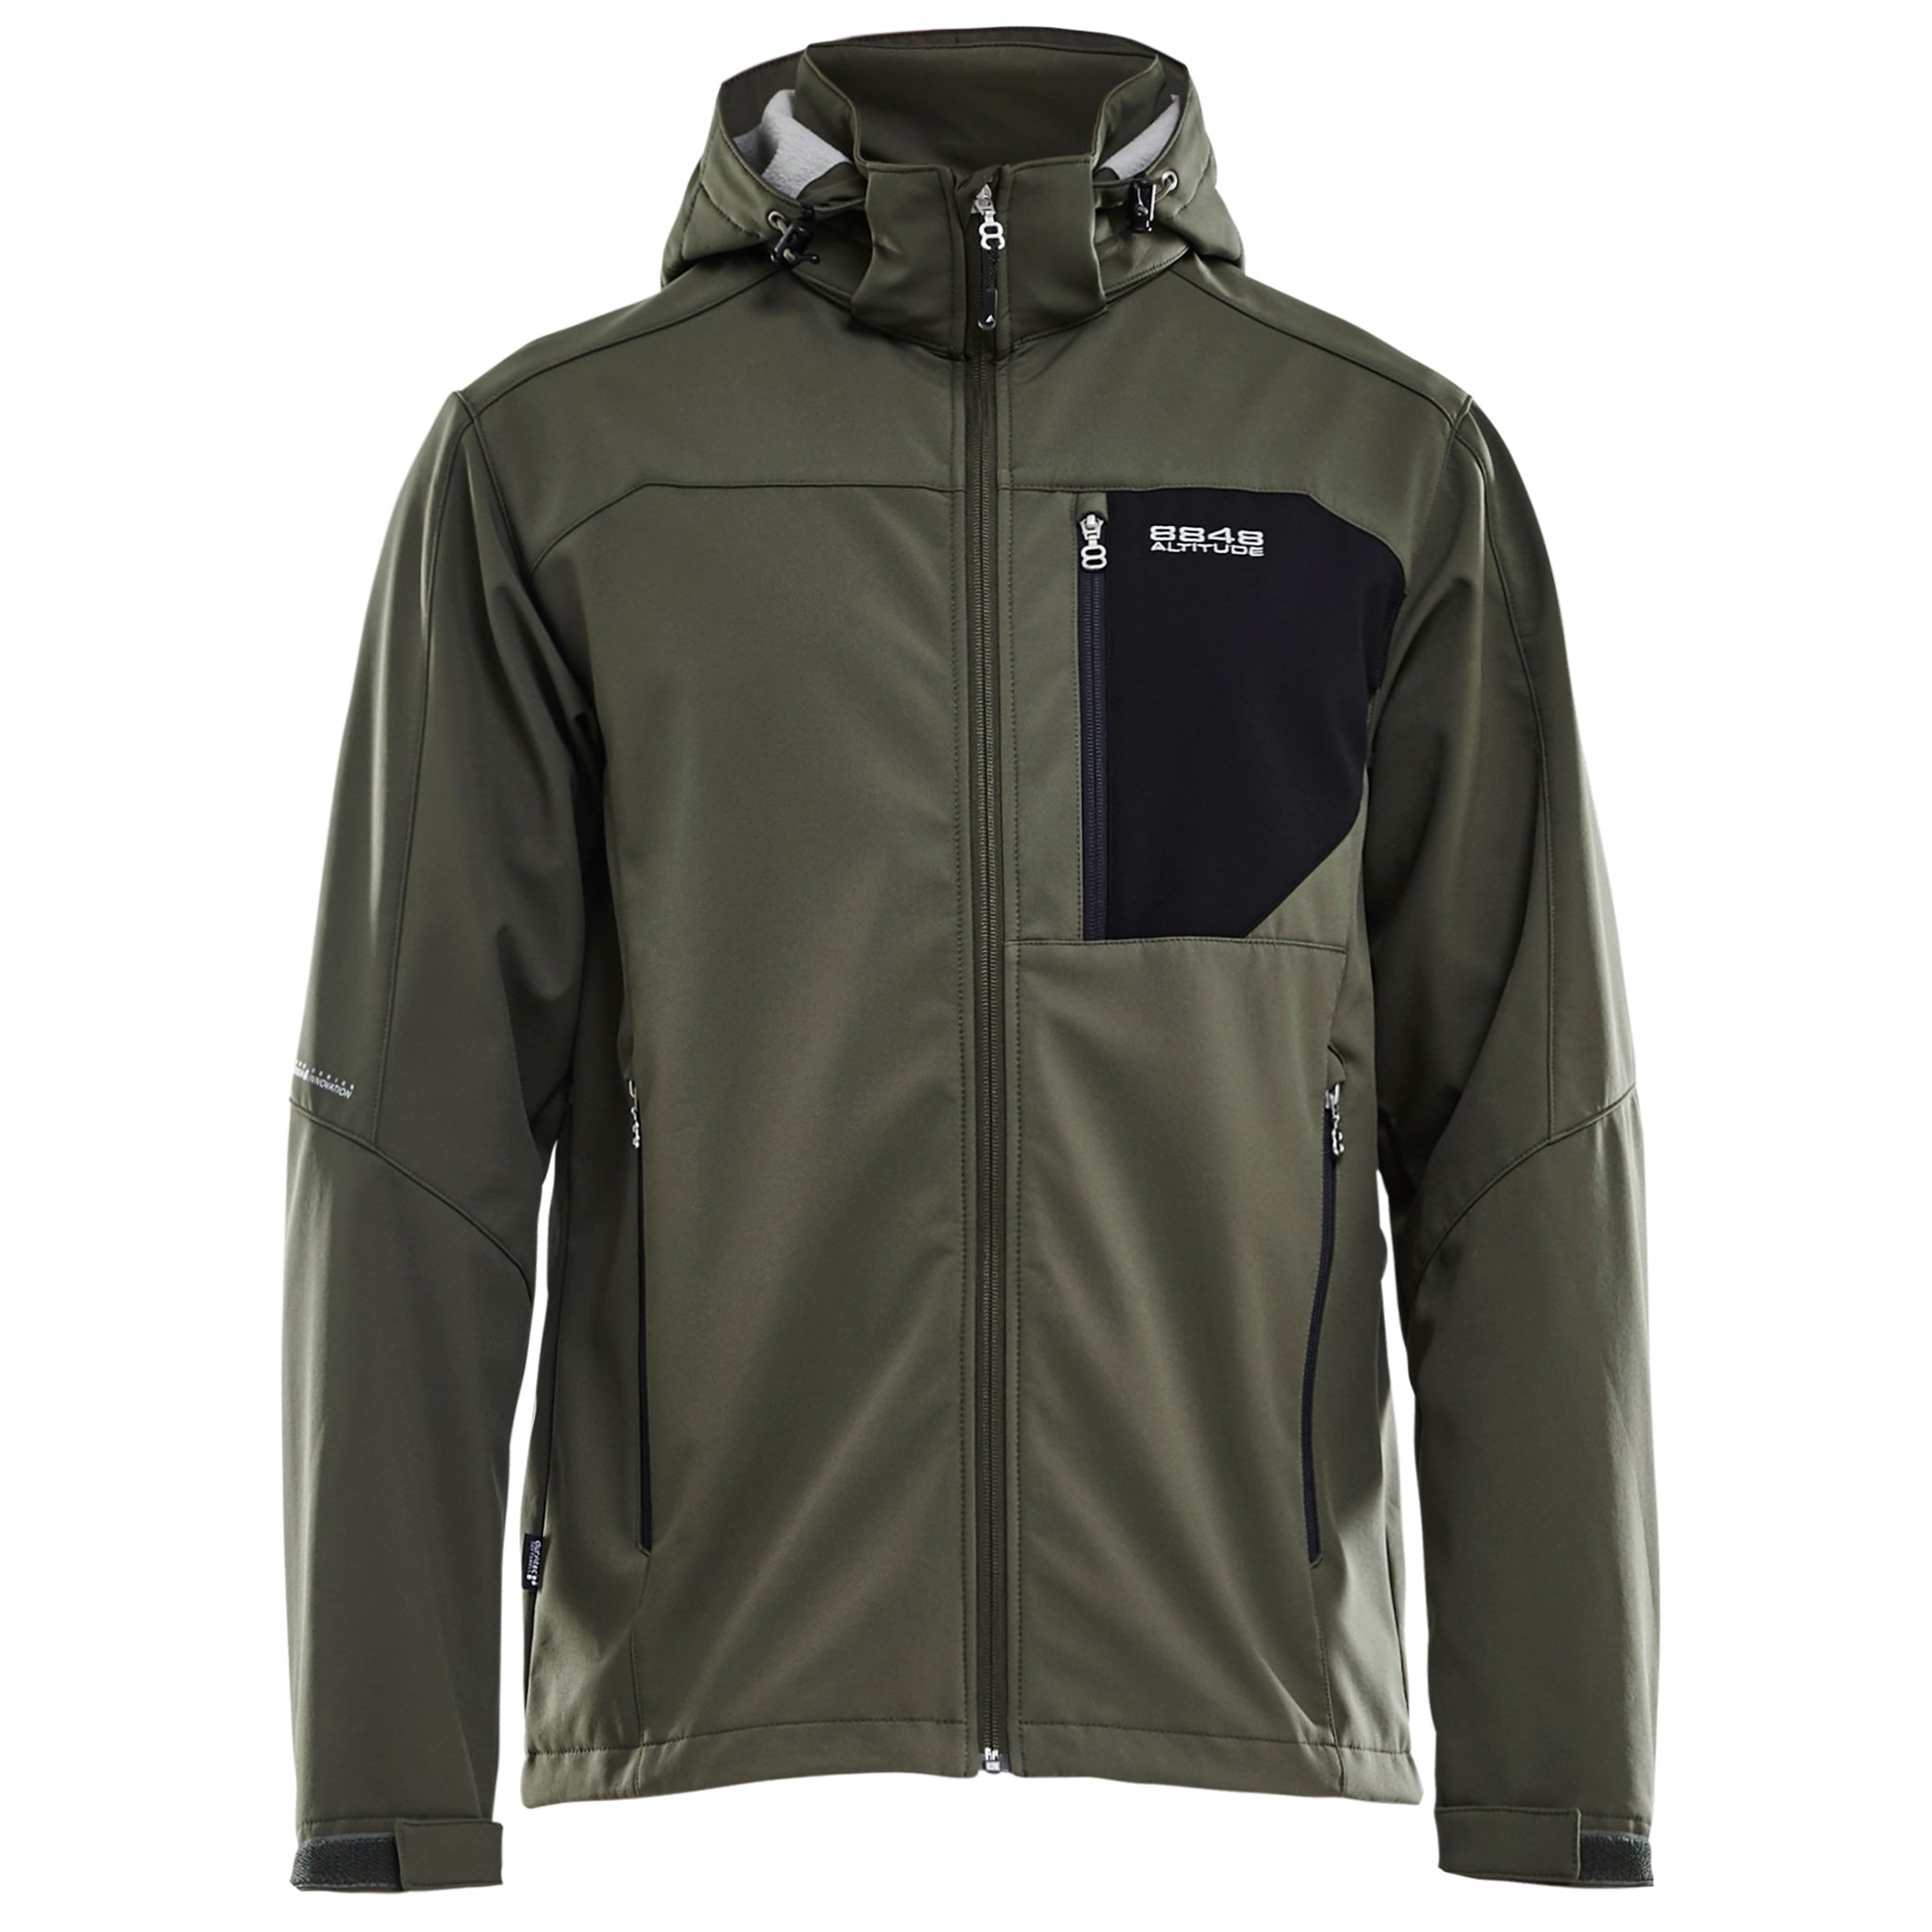 rendering Variant verden Buy 8848 Altitude Daft Softshell from Outnorth